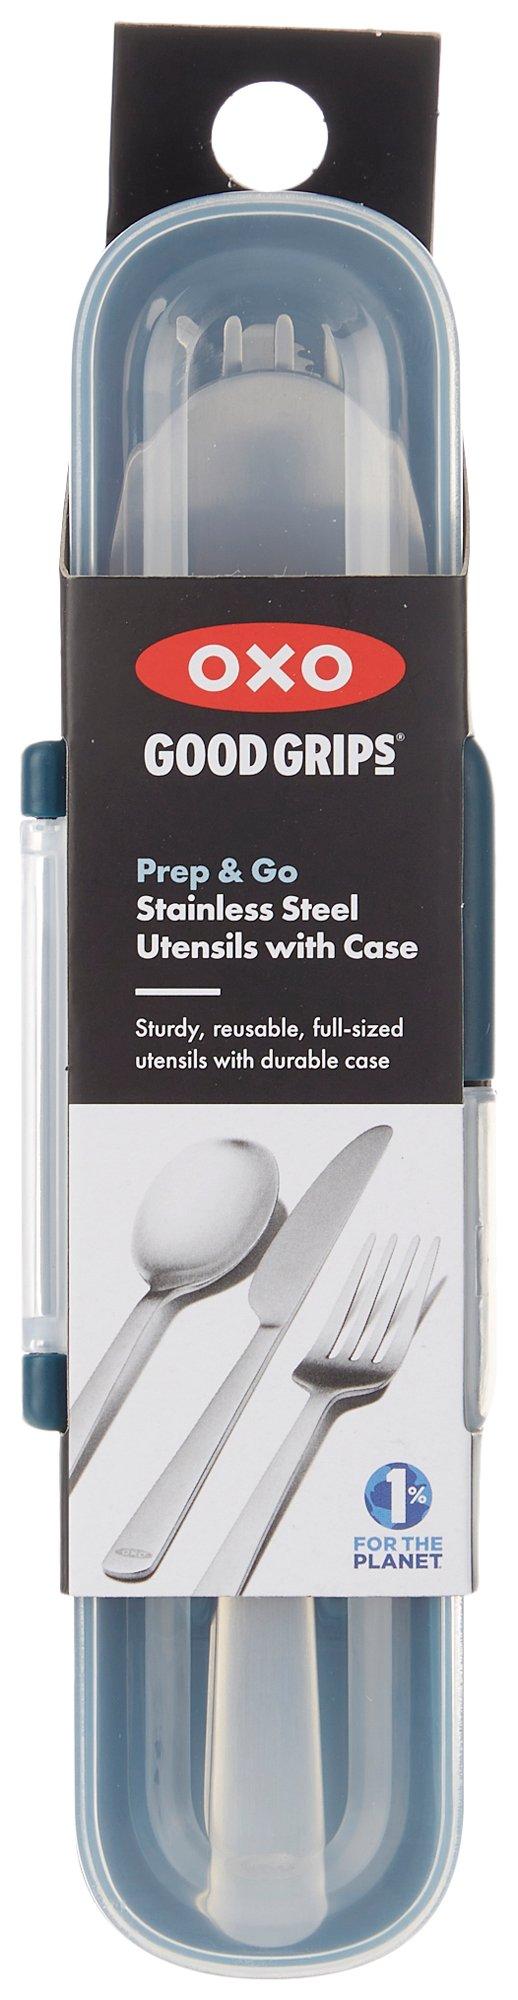 Prep & Go Stainless Steel Utensils With Case